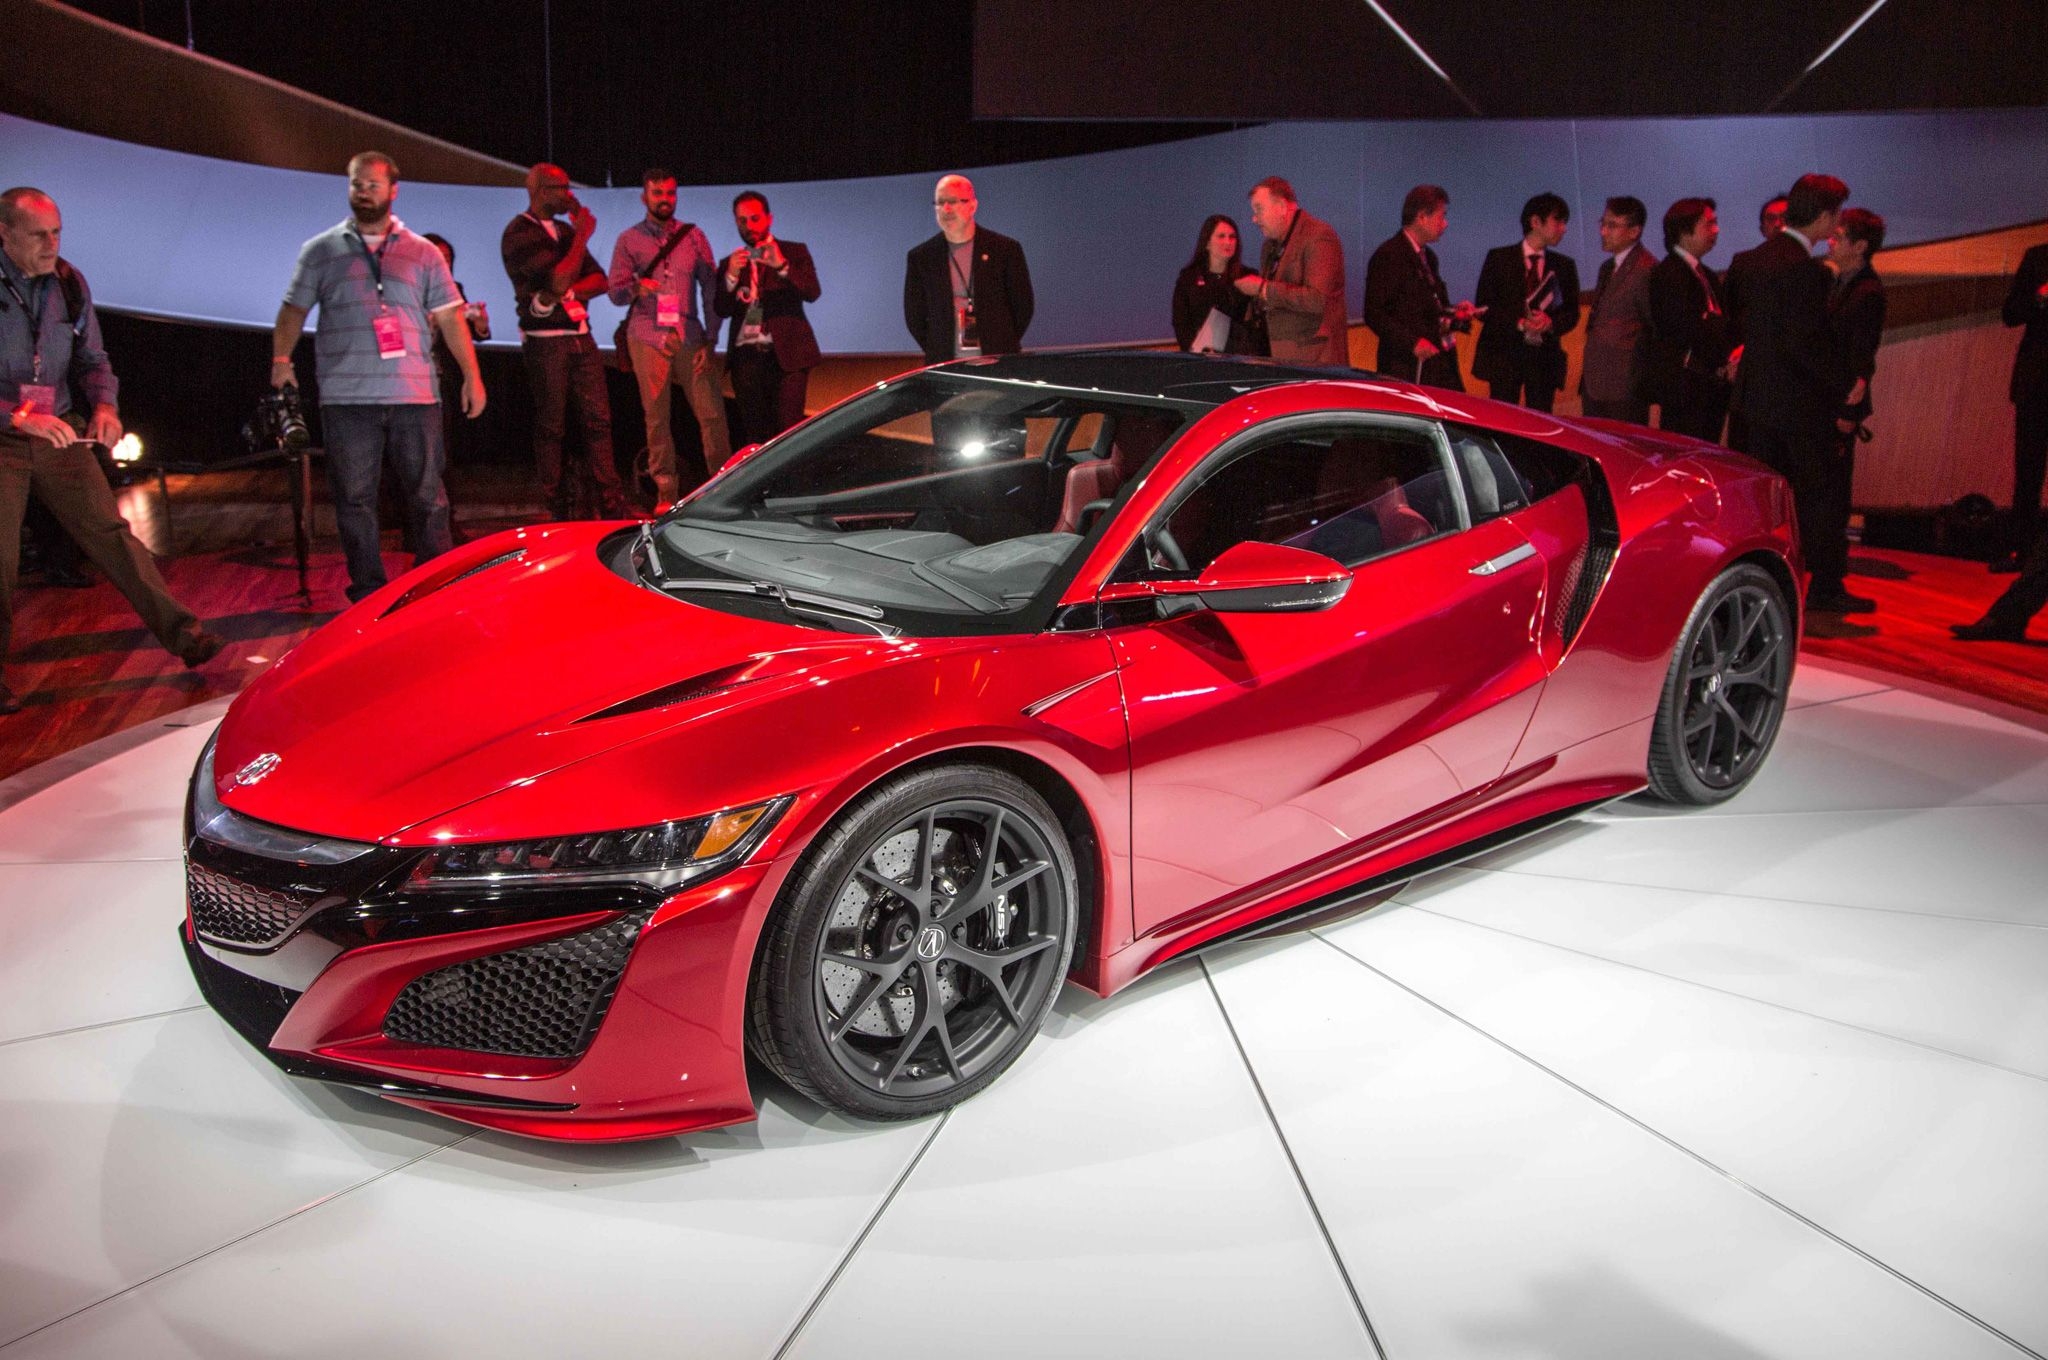 2018 Acura Nsx Interior, Exterior and Review